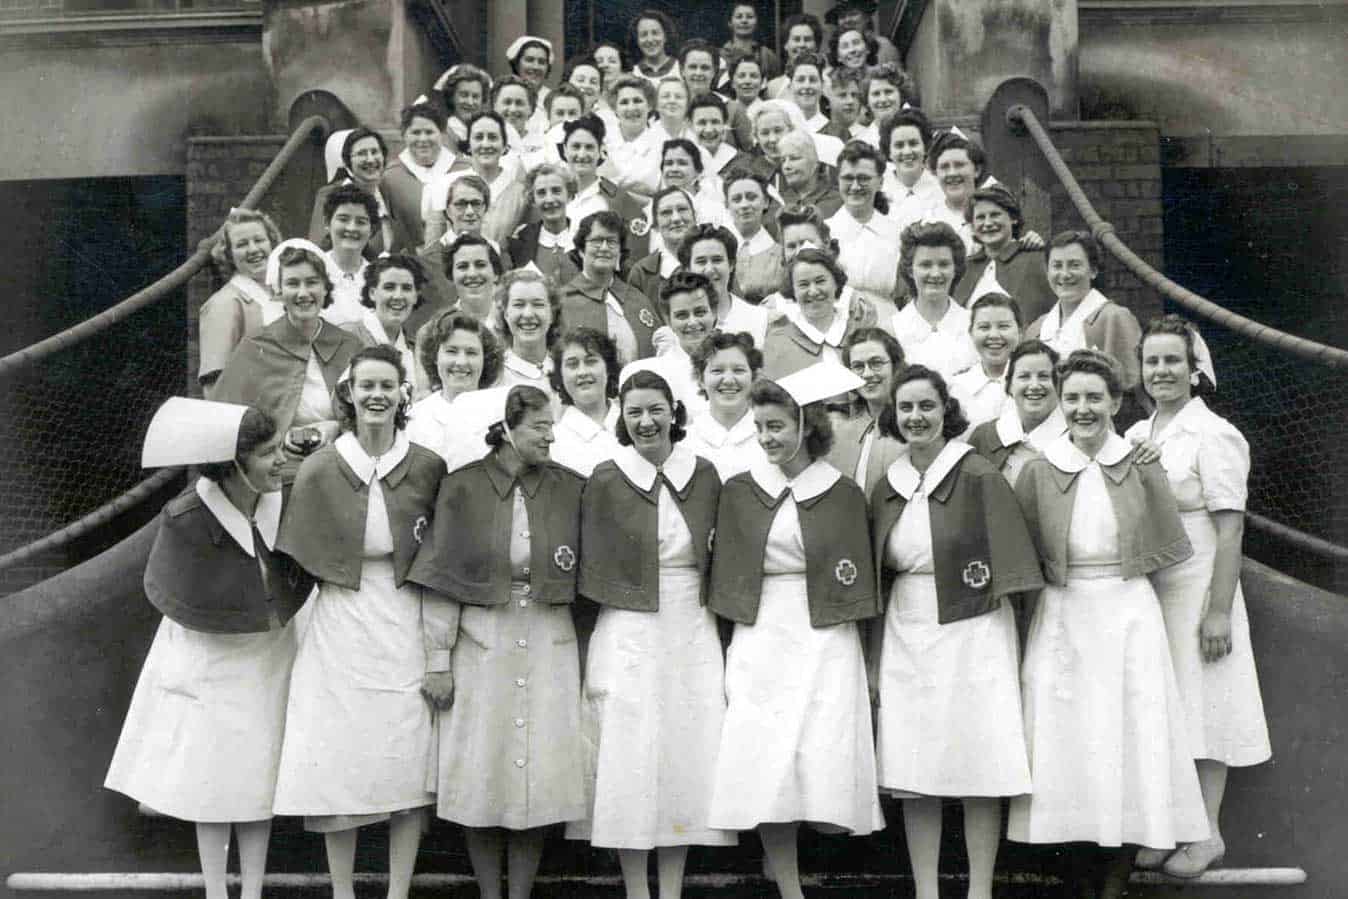 Dr Rosemary Bryant reflects on the evolution of nursing over the past 50 years